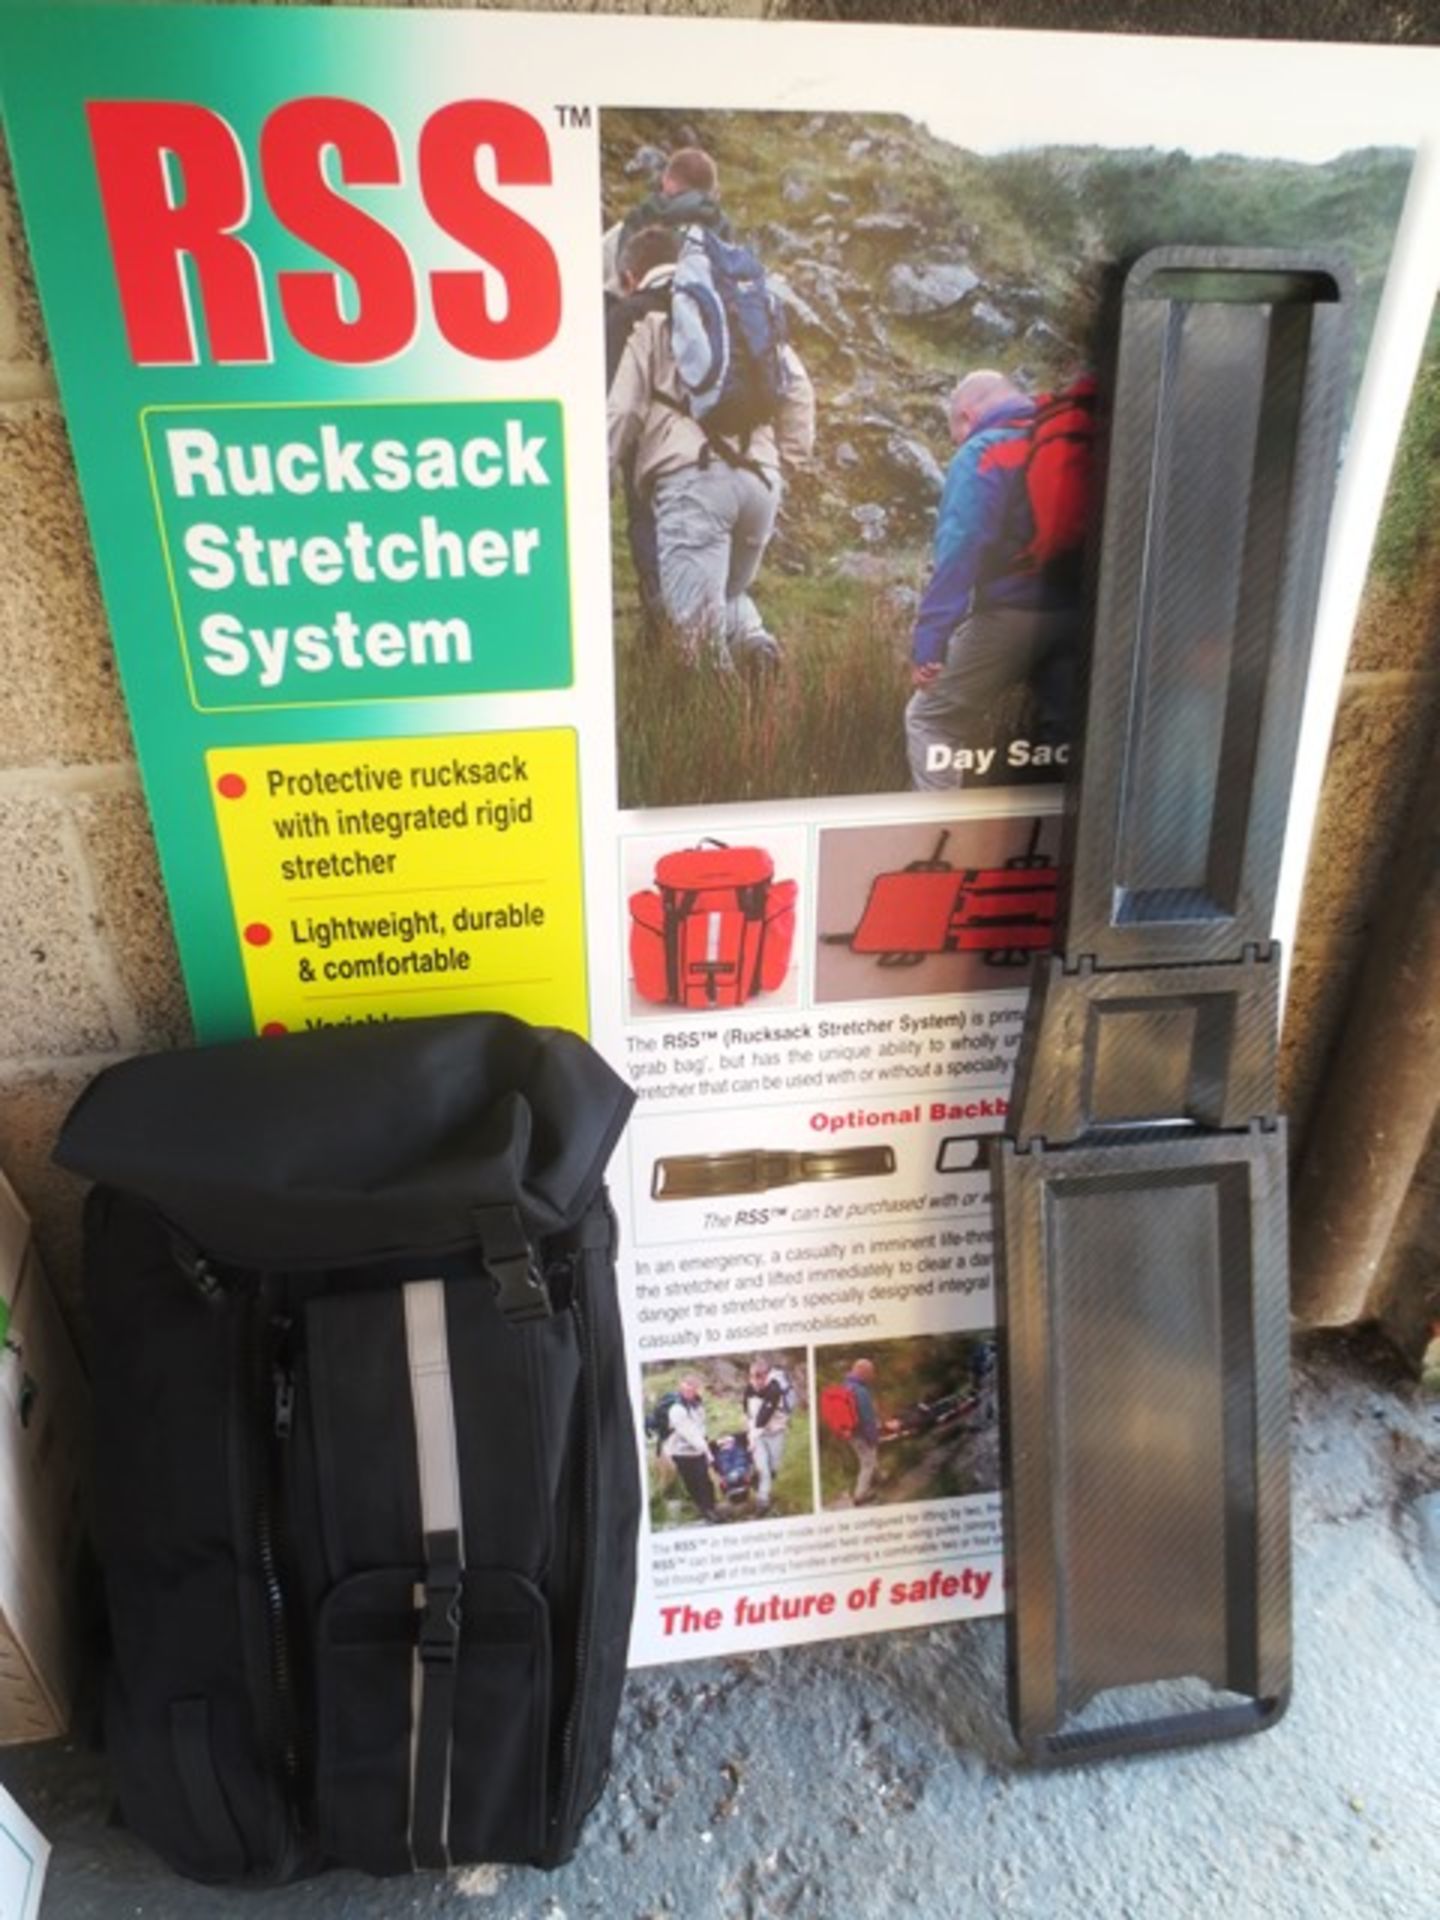 Black Rucksack Stretcher Systems (RSS) Day sack/grab bag, fold out rucksack stretcher, with - Image 2 of 9